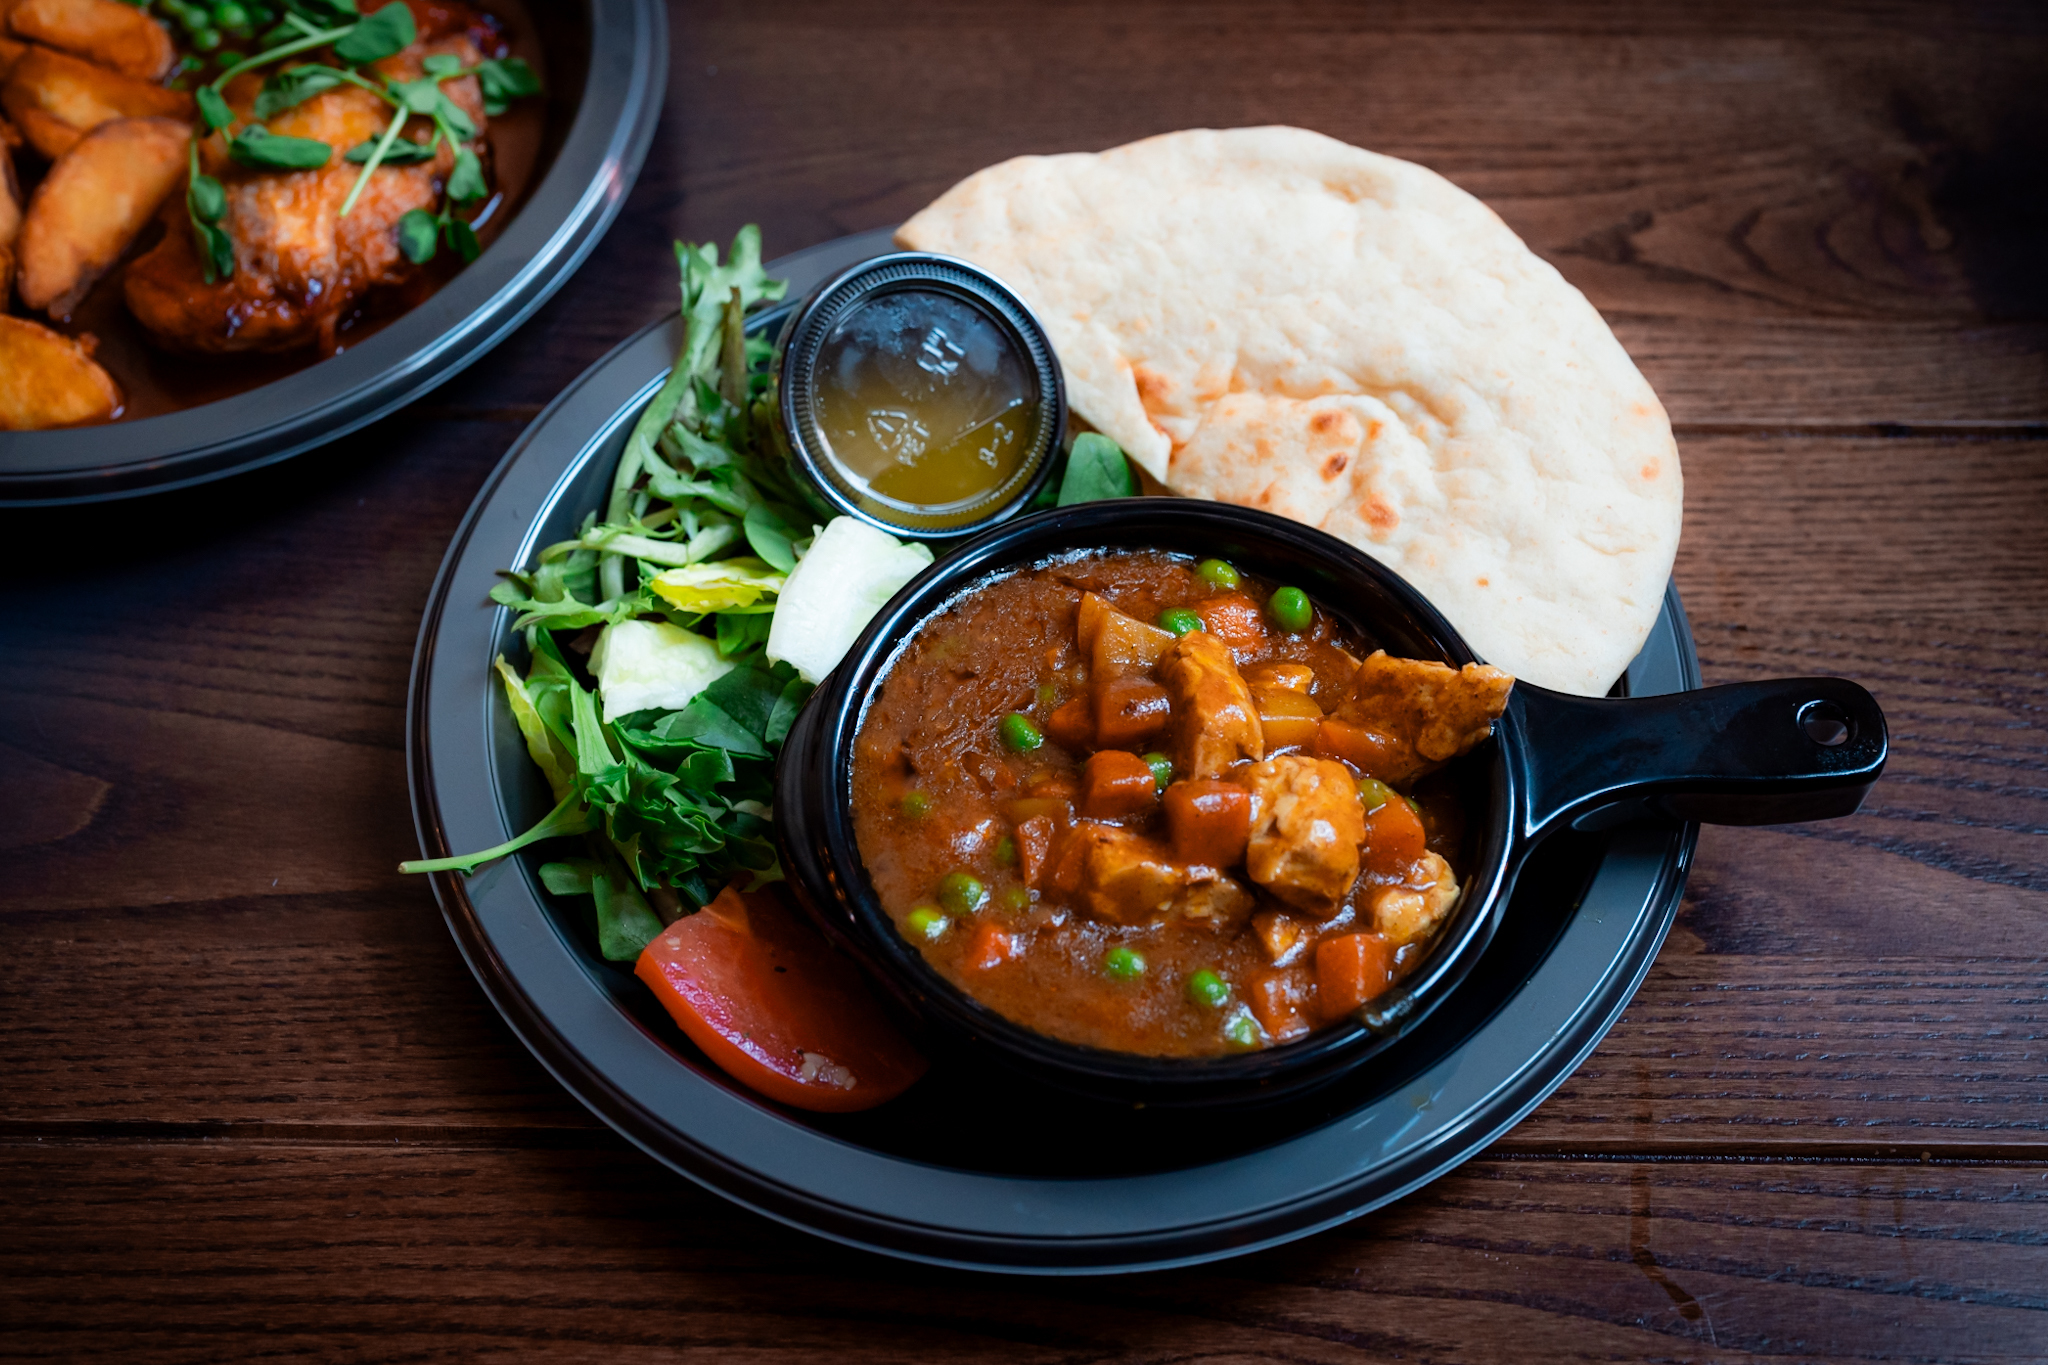 Vegan Curry from Leaky Cauldron inside the Wizarding World of Harry Potter